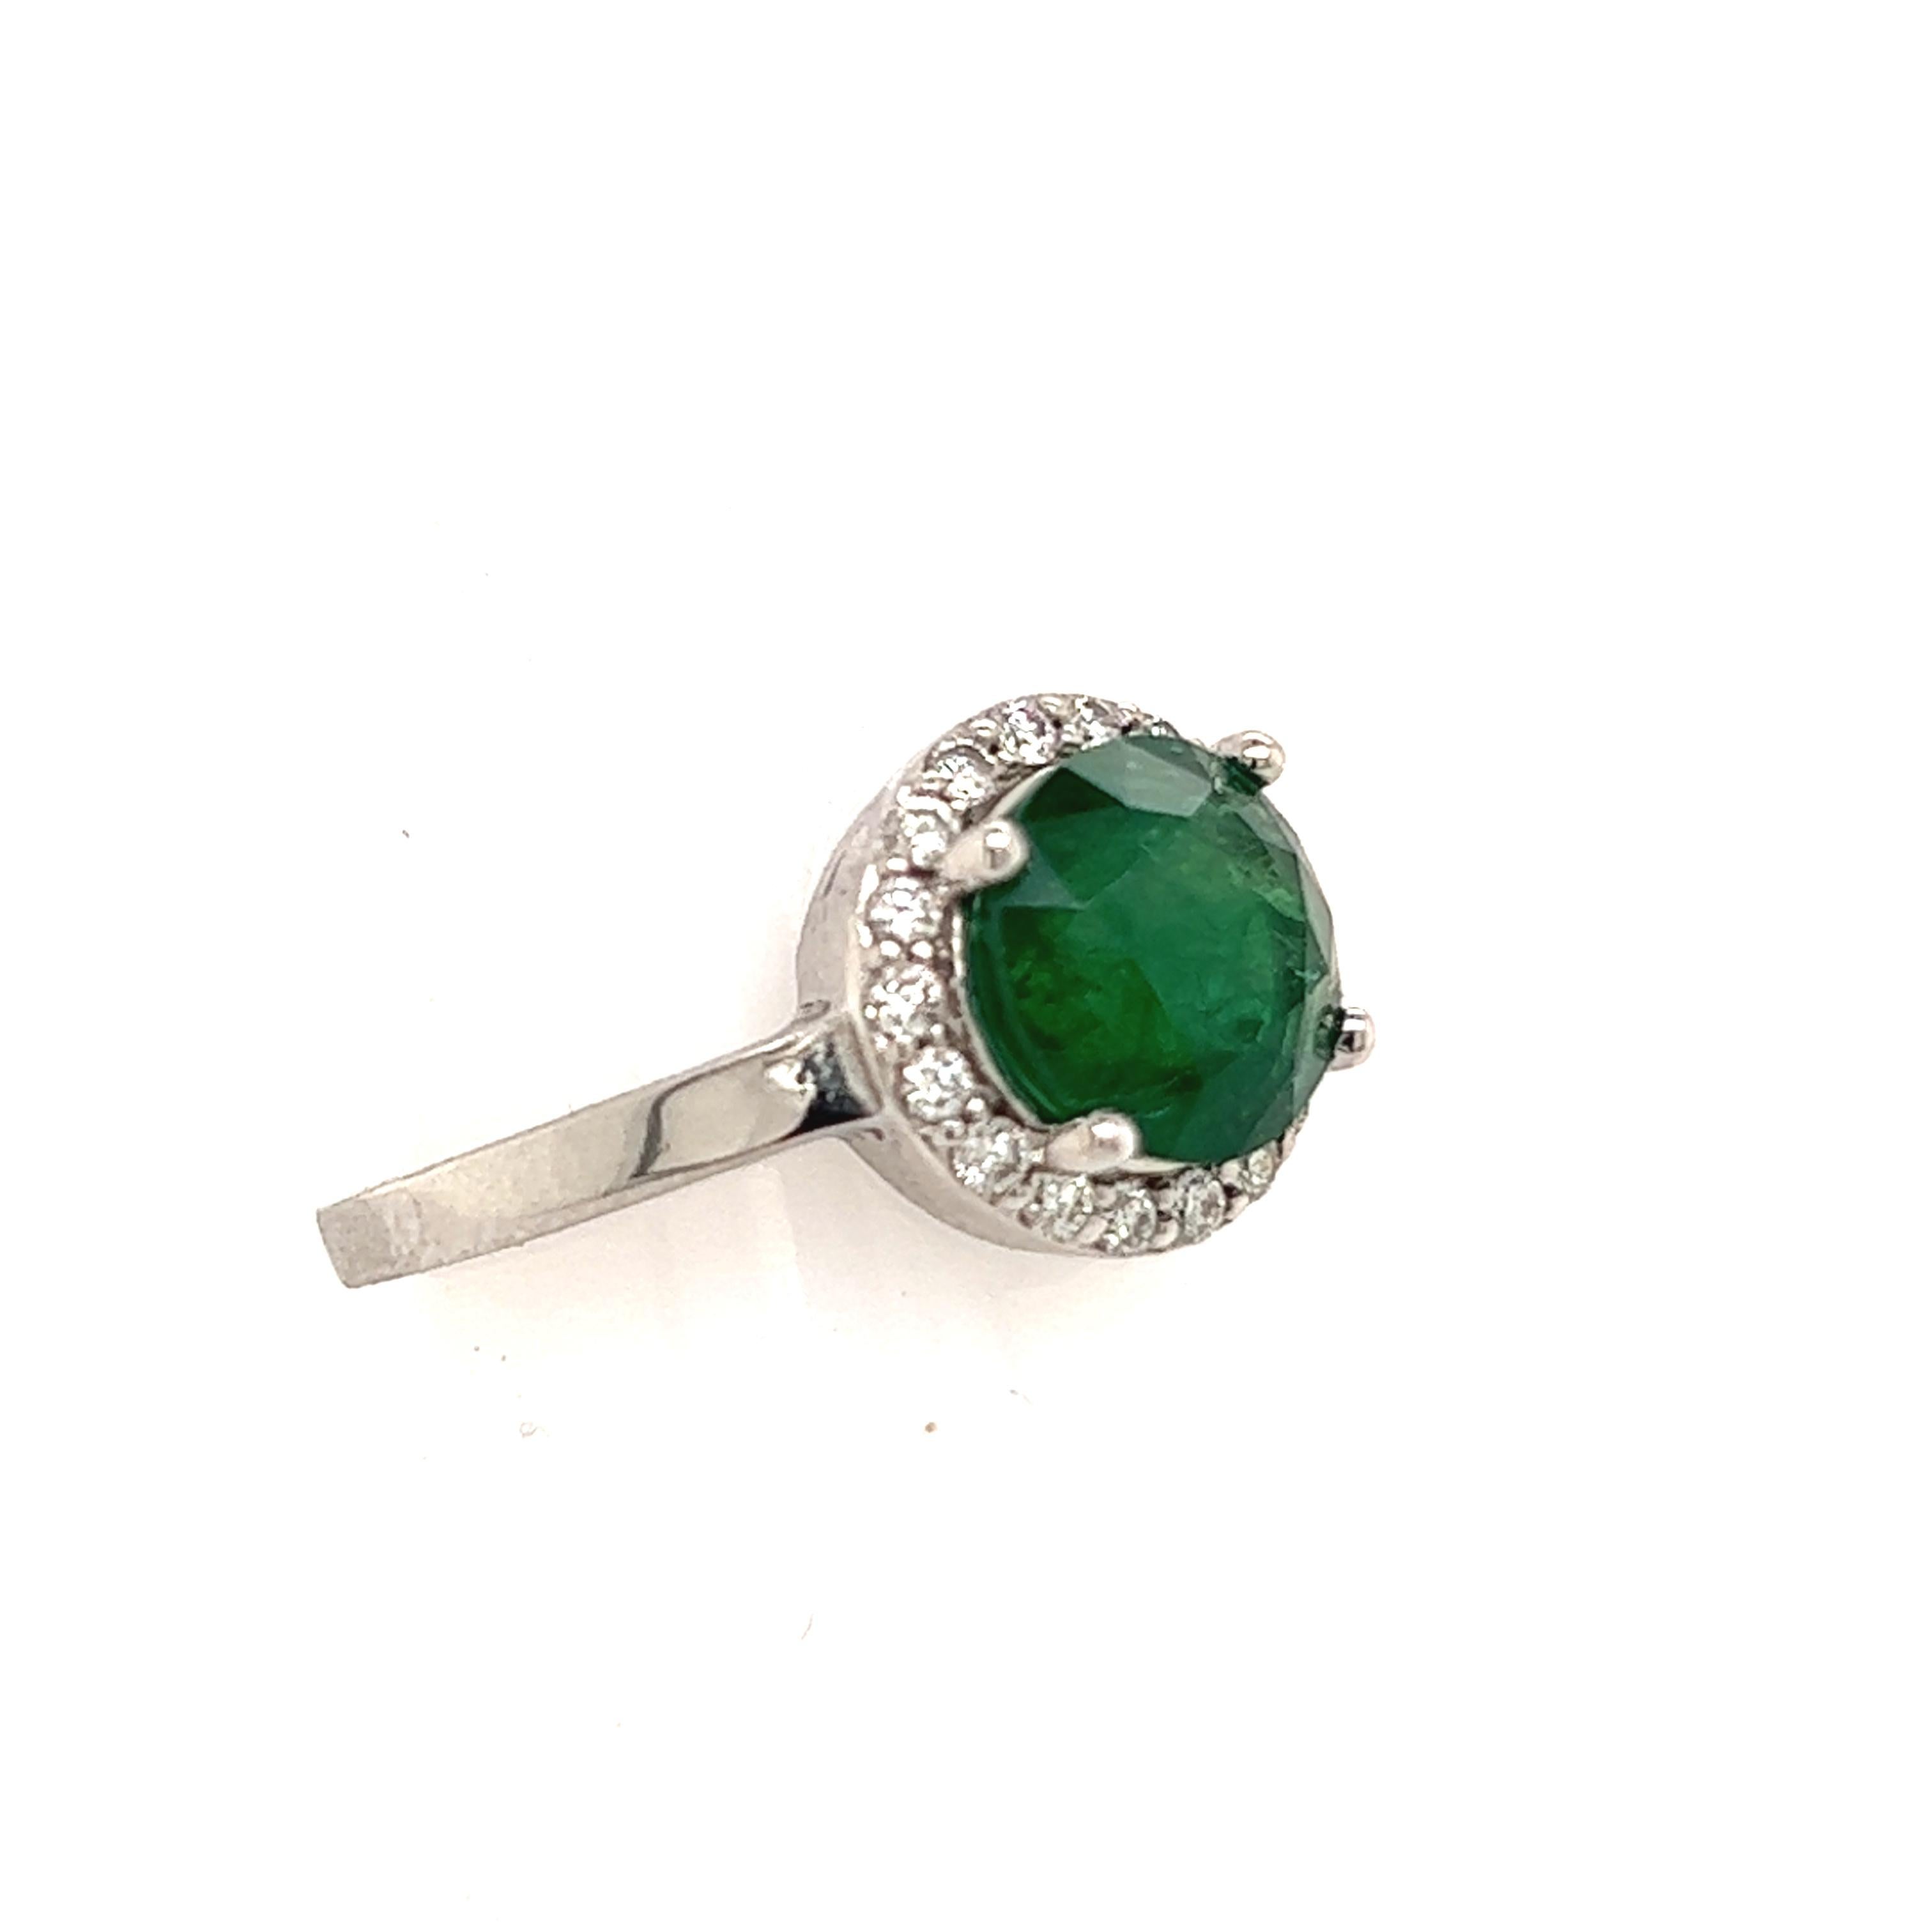 Natural Emerald Diamond Ring 14k Gold 2.83 TCW Certified $4,950 213252

Nothing says, “I Love you” more than Diamonds and Pearls!

This Emerald ring has been Certified, Inspected, and Appraised by Gemological Appraisal Laboratory

Gemological